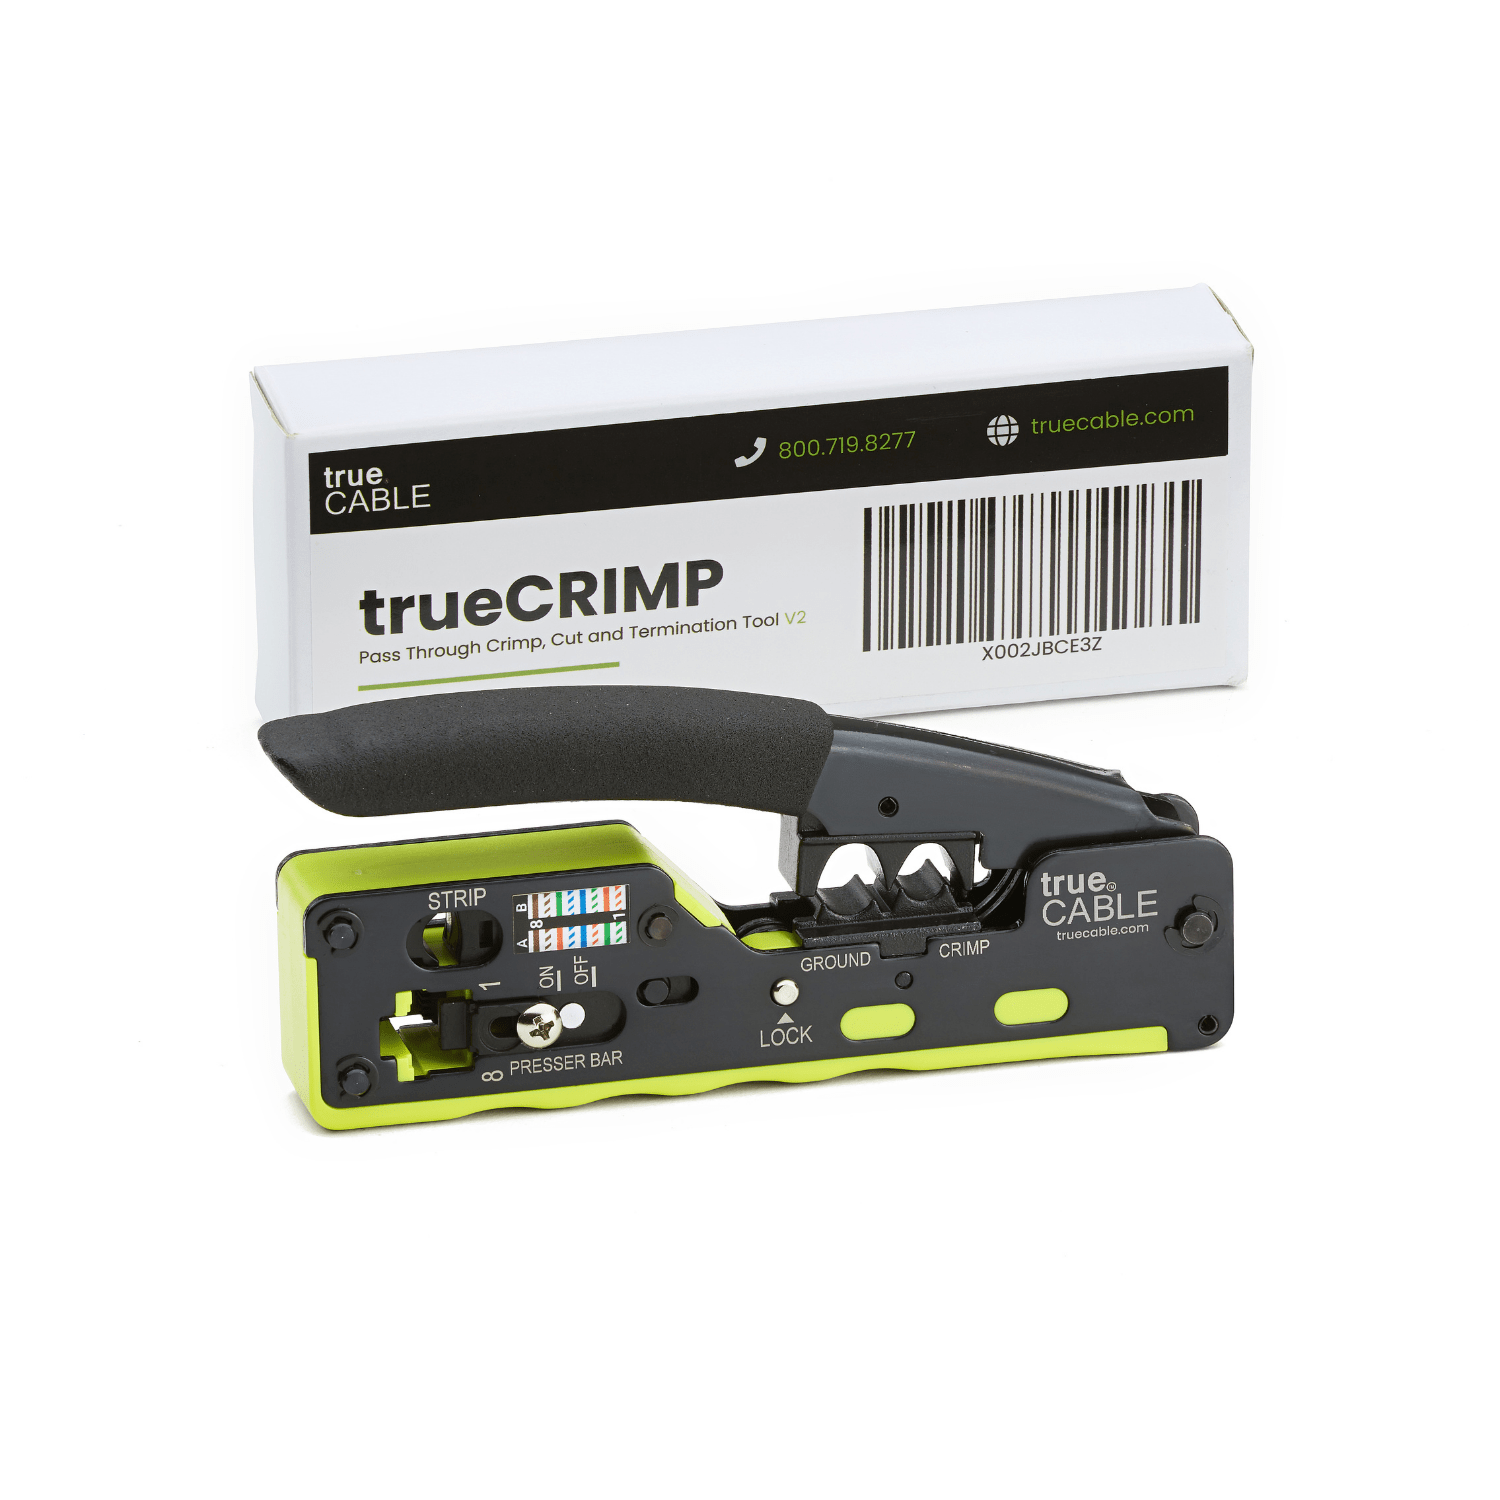 trueCABLE All-in-One Crimp and Termination Tool, Compatible with Cat5e, Cat6, Cat6a Ethernet RJ45 Connectors, Shielded & Unshielded, Pass